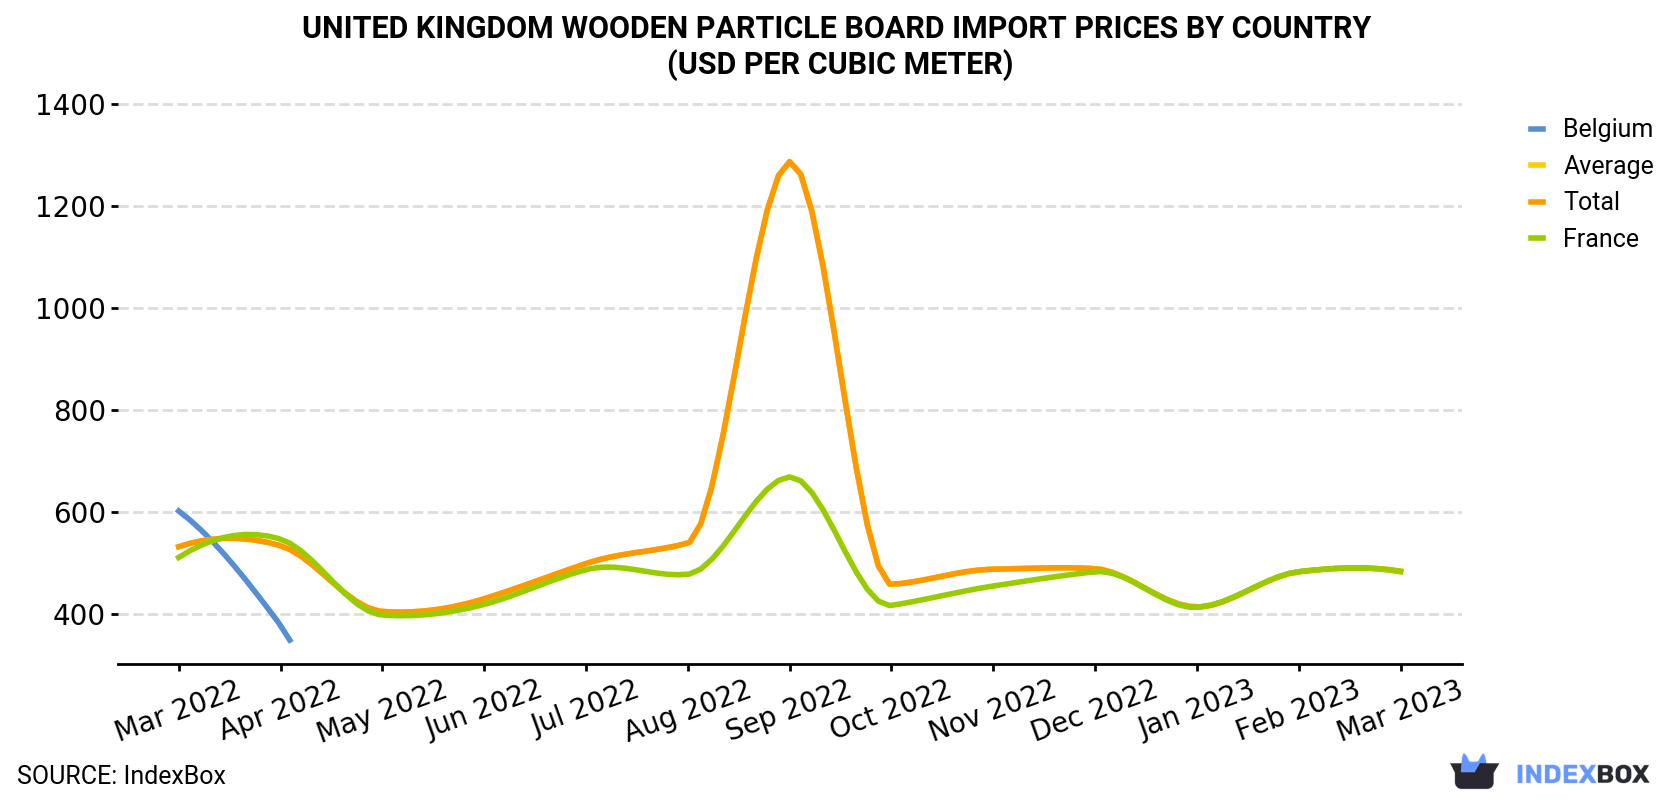 United Kingdom Wooden Particle Board Import Prices By Country (USD Per Cubic Meter)